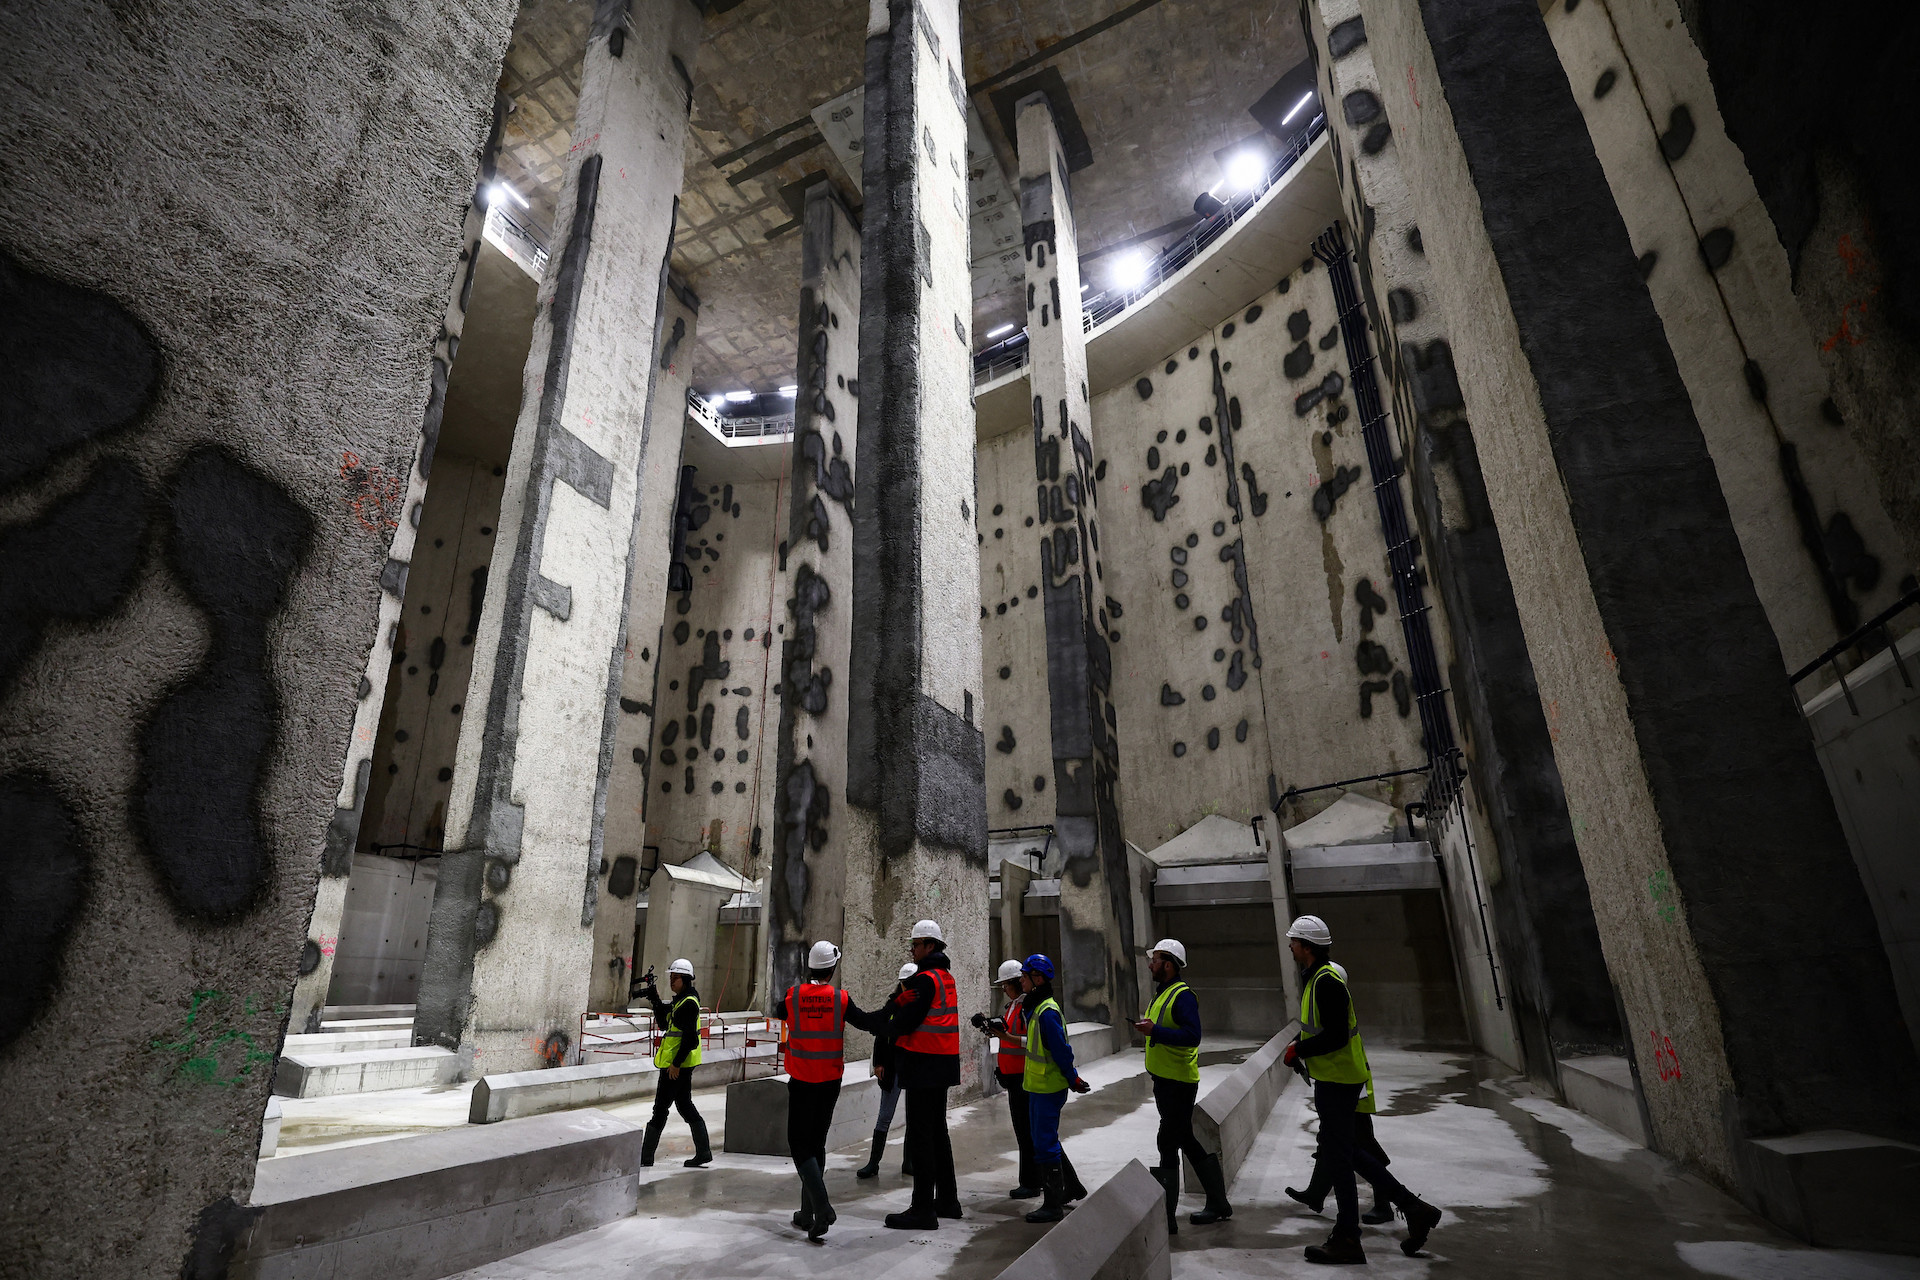 Visitors walk inside the construction site of the 30-meter-deep Austerlitz basin, a river Seine water storage and treatment basin, aiming to make the river cleaner for the Paris 2024 Olympic Games. GETTY IMAGES